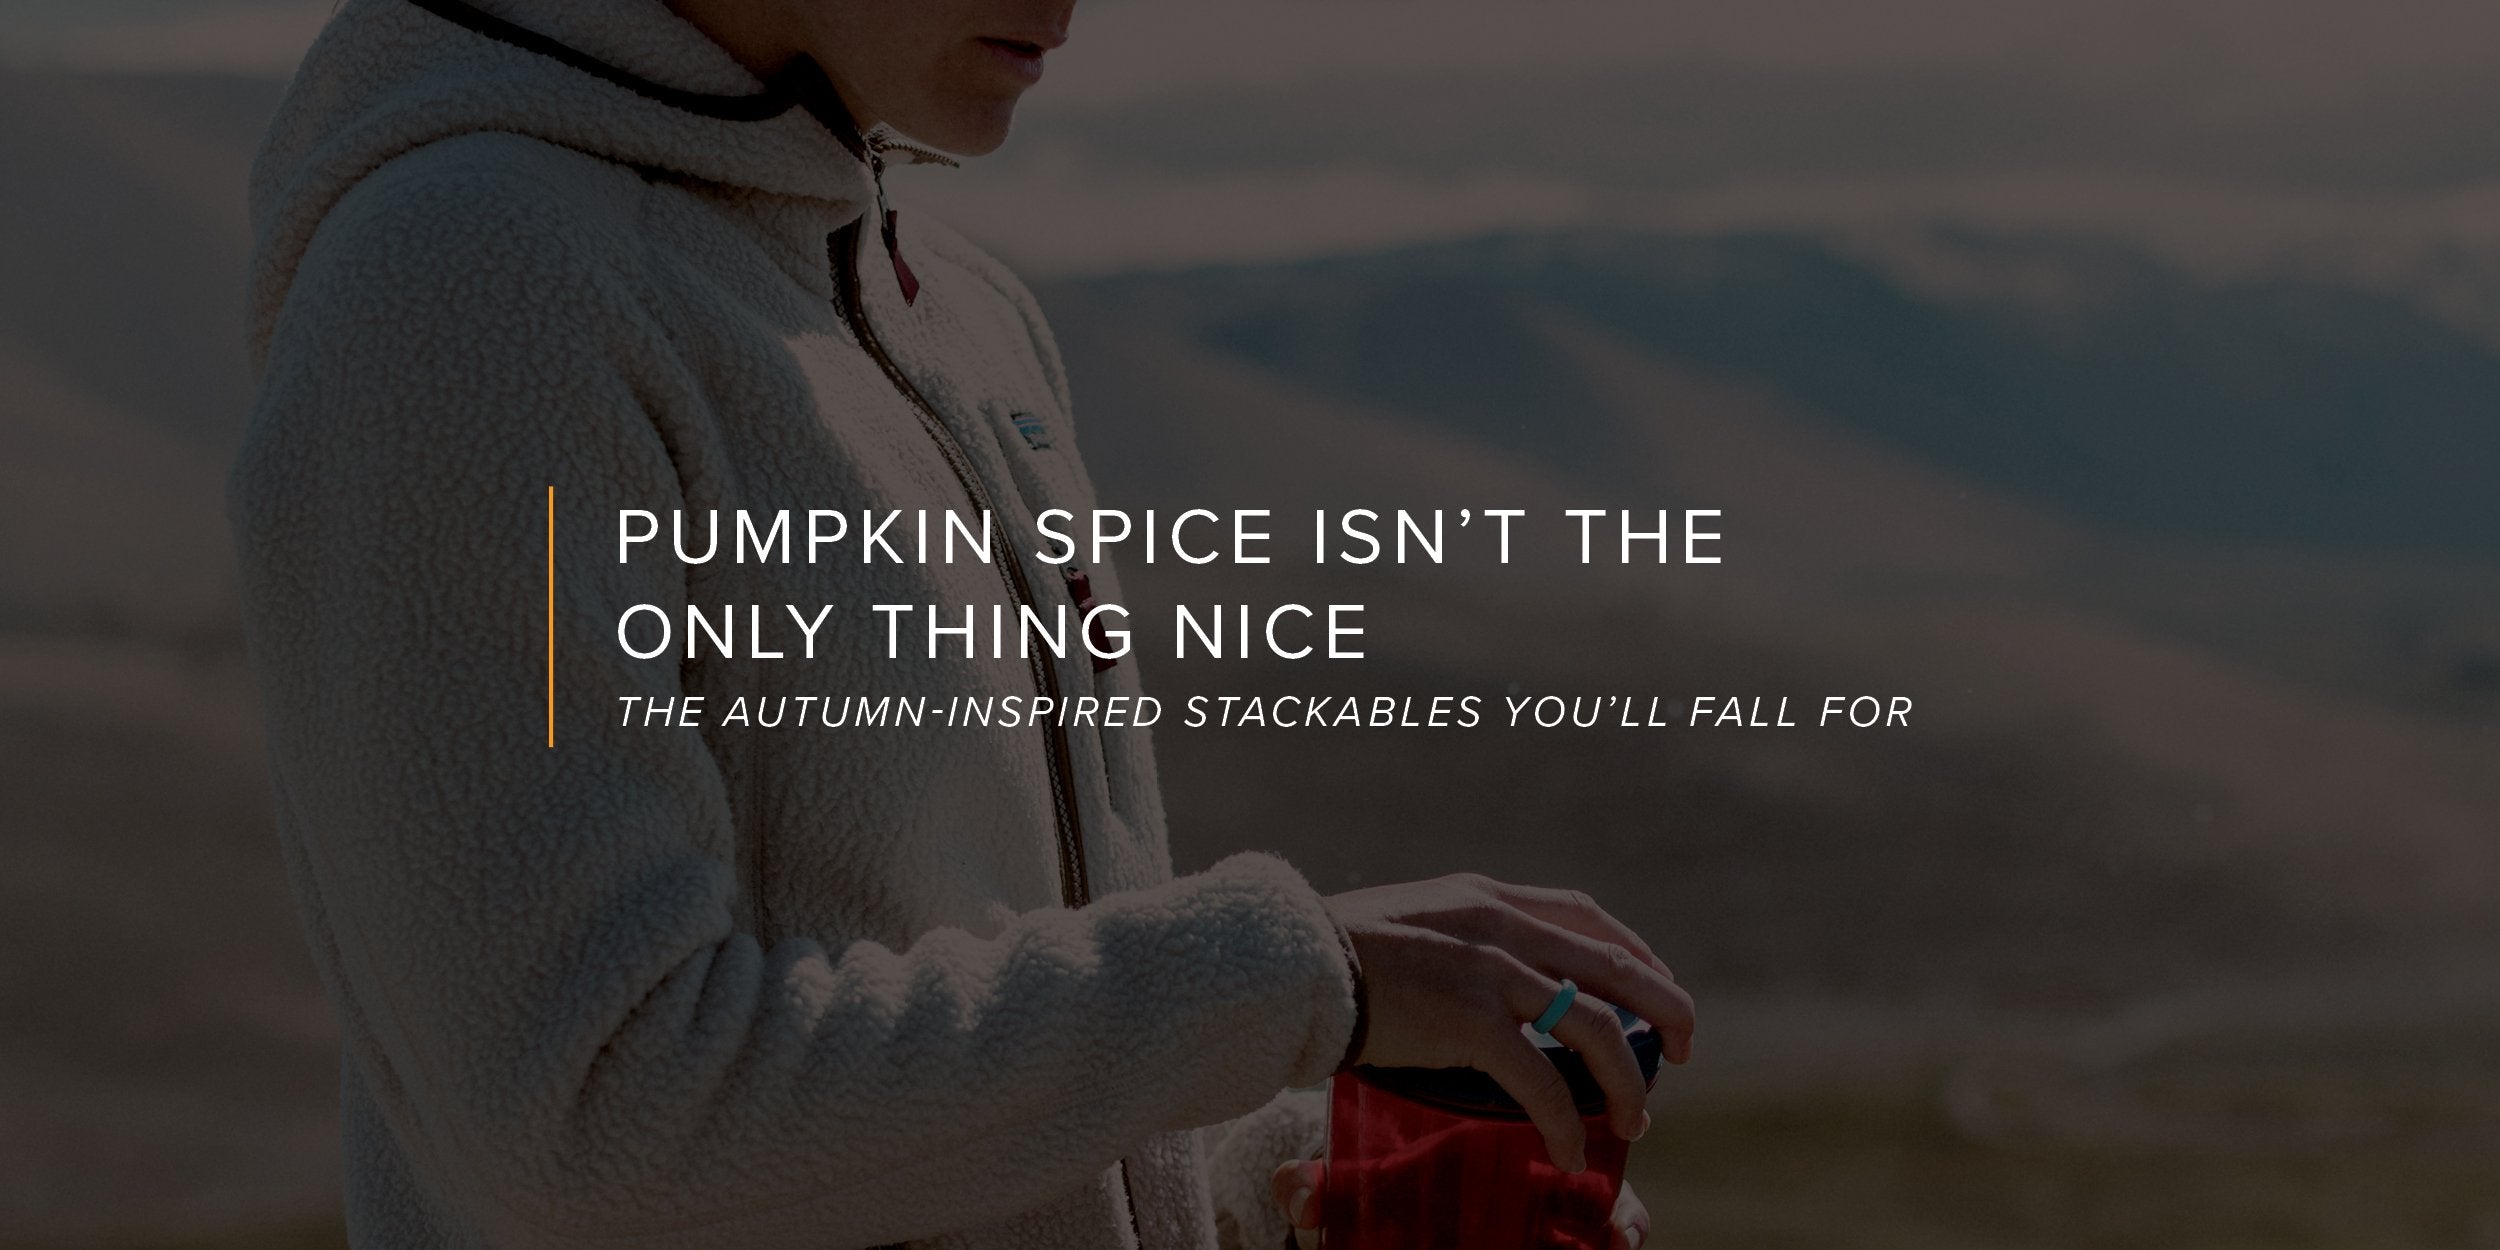 Pumpkin Spice Isn’t the Only Thing Nice